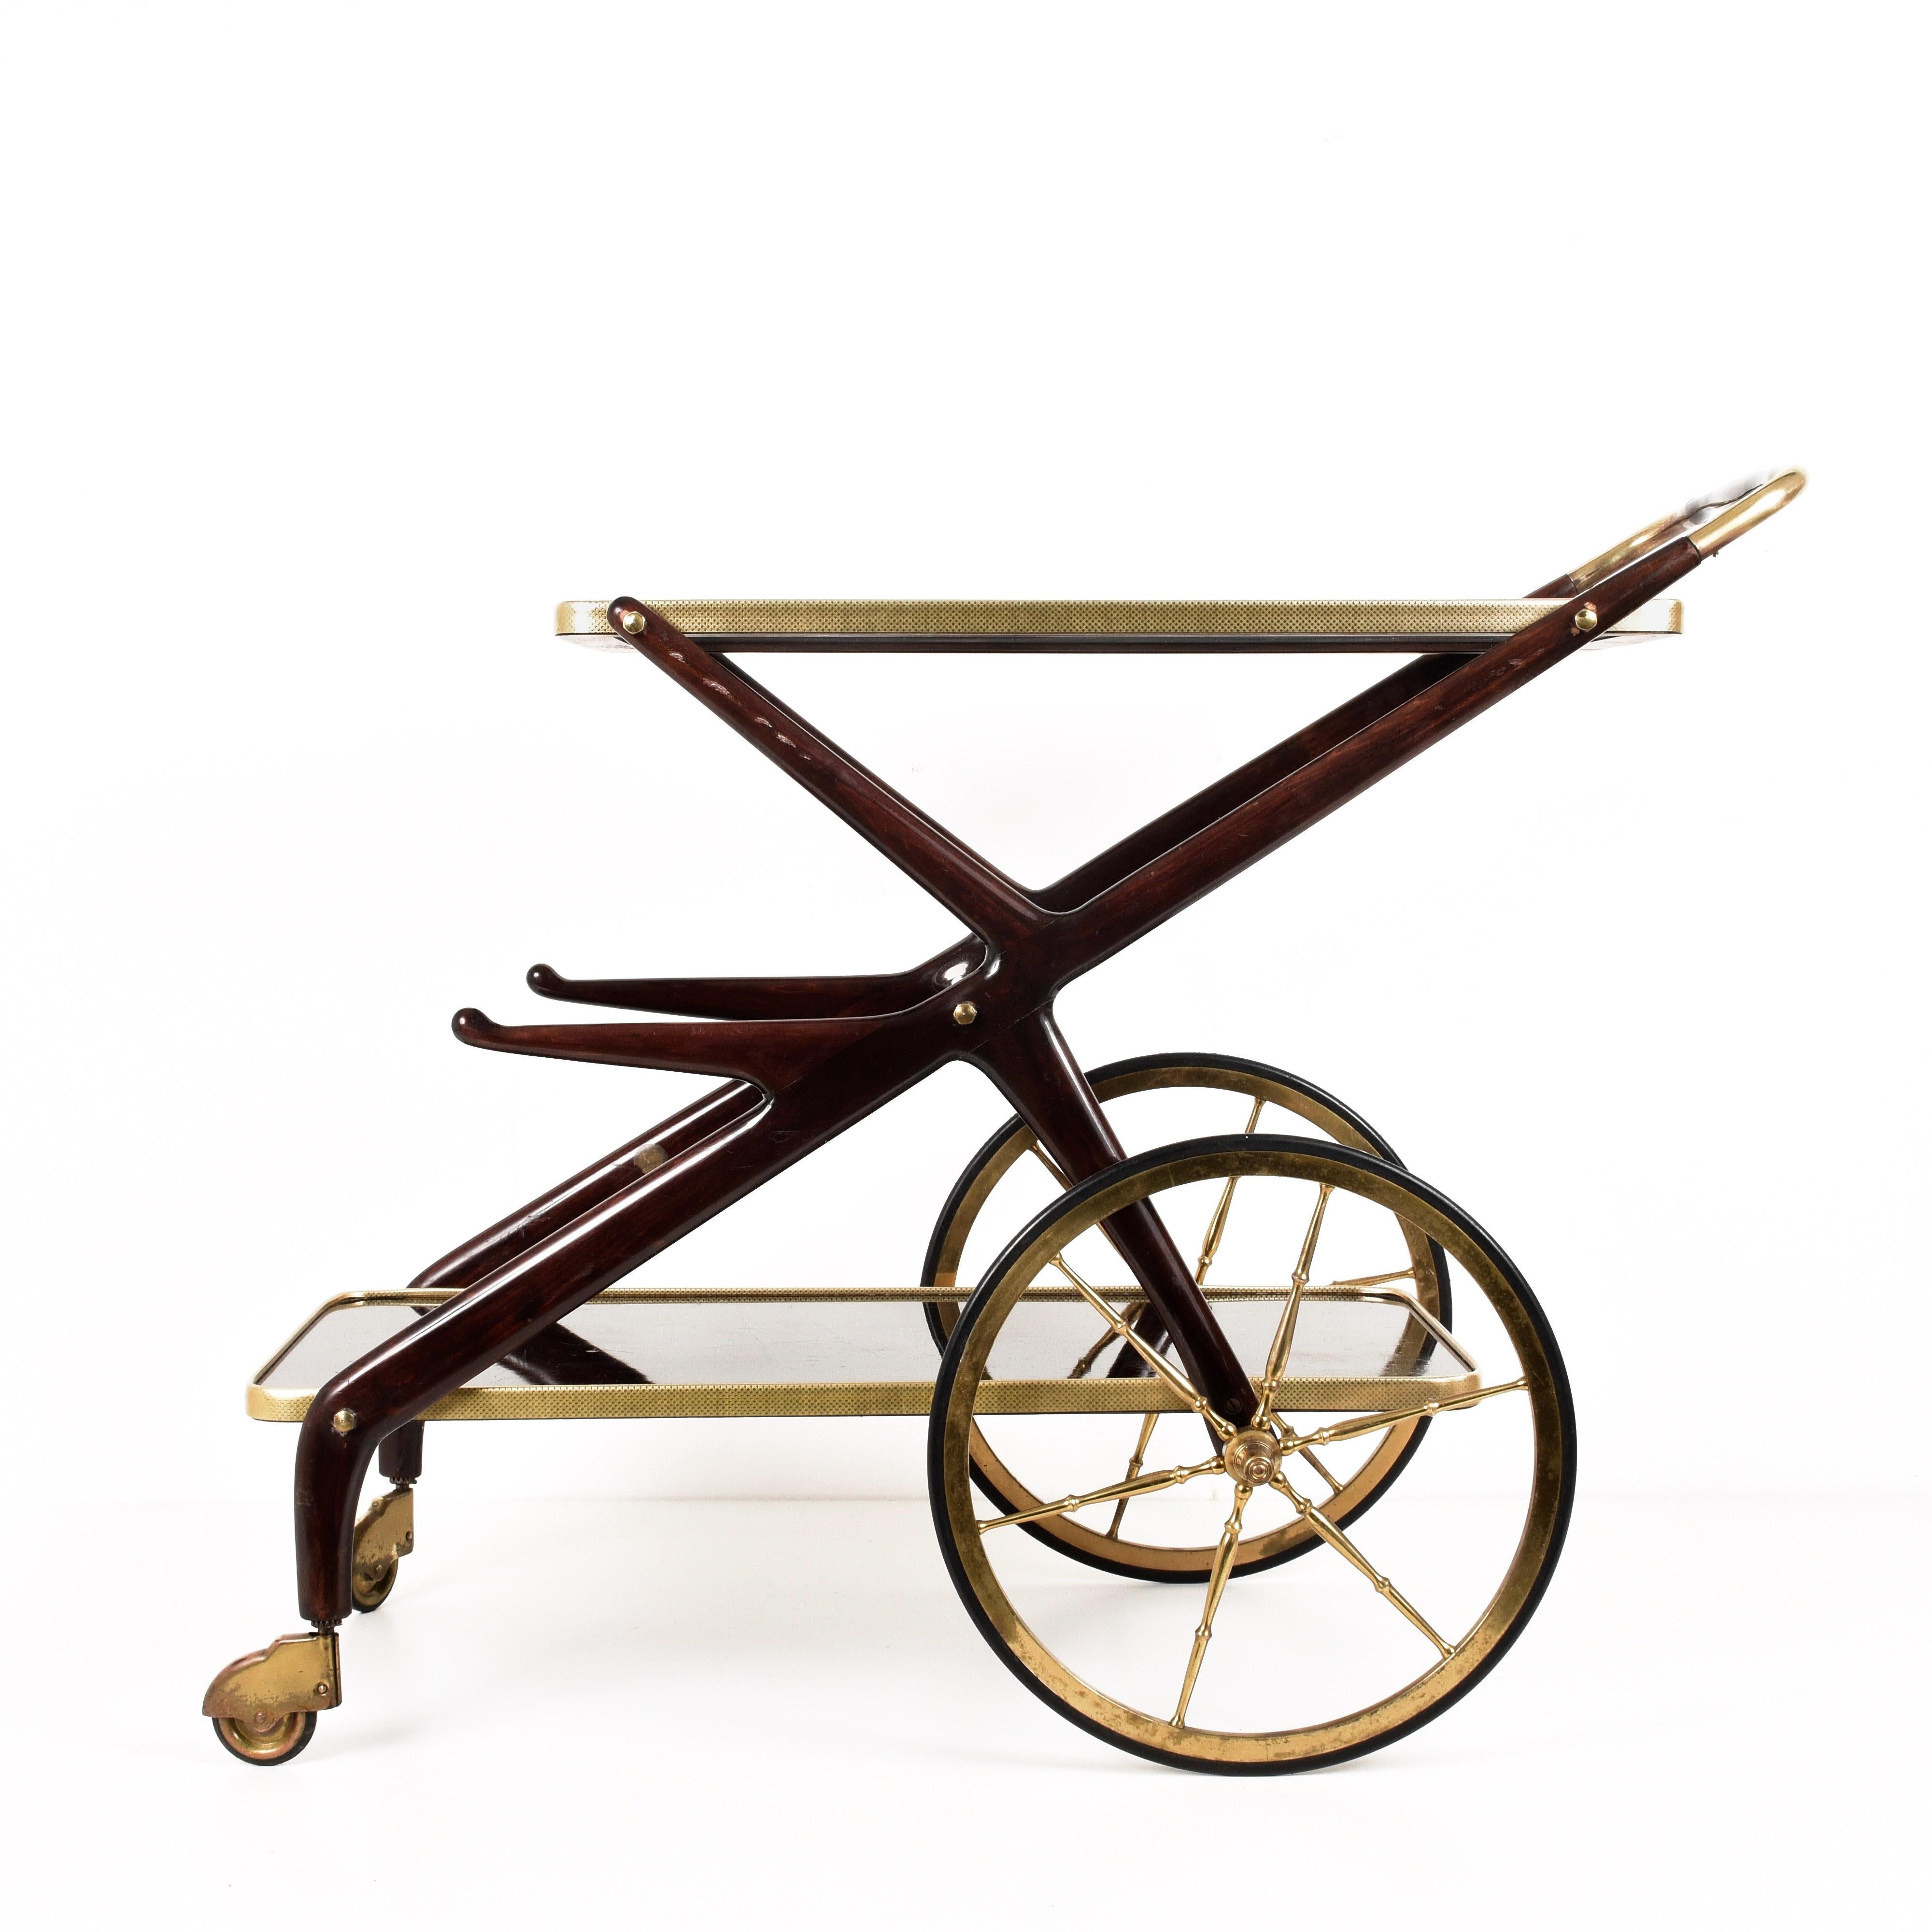 Amazing bar trolley in wood with glass top and large wheels in brass. This wonderful piece was produced in Italy during the 1950s.

This astonishing bar cart features, two big wheels in brass, a sinuous wood structure vitrified with two shelves and